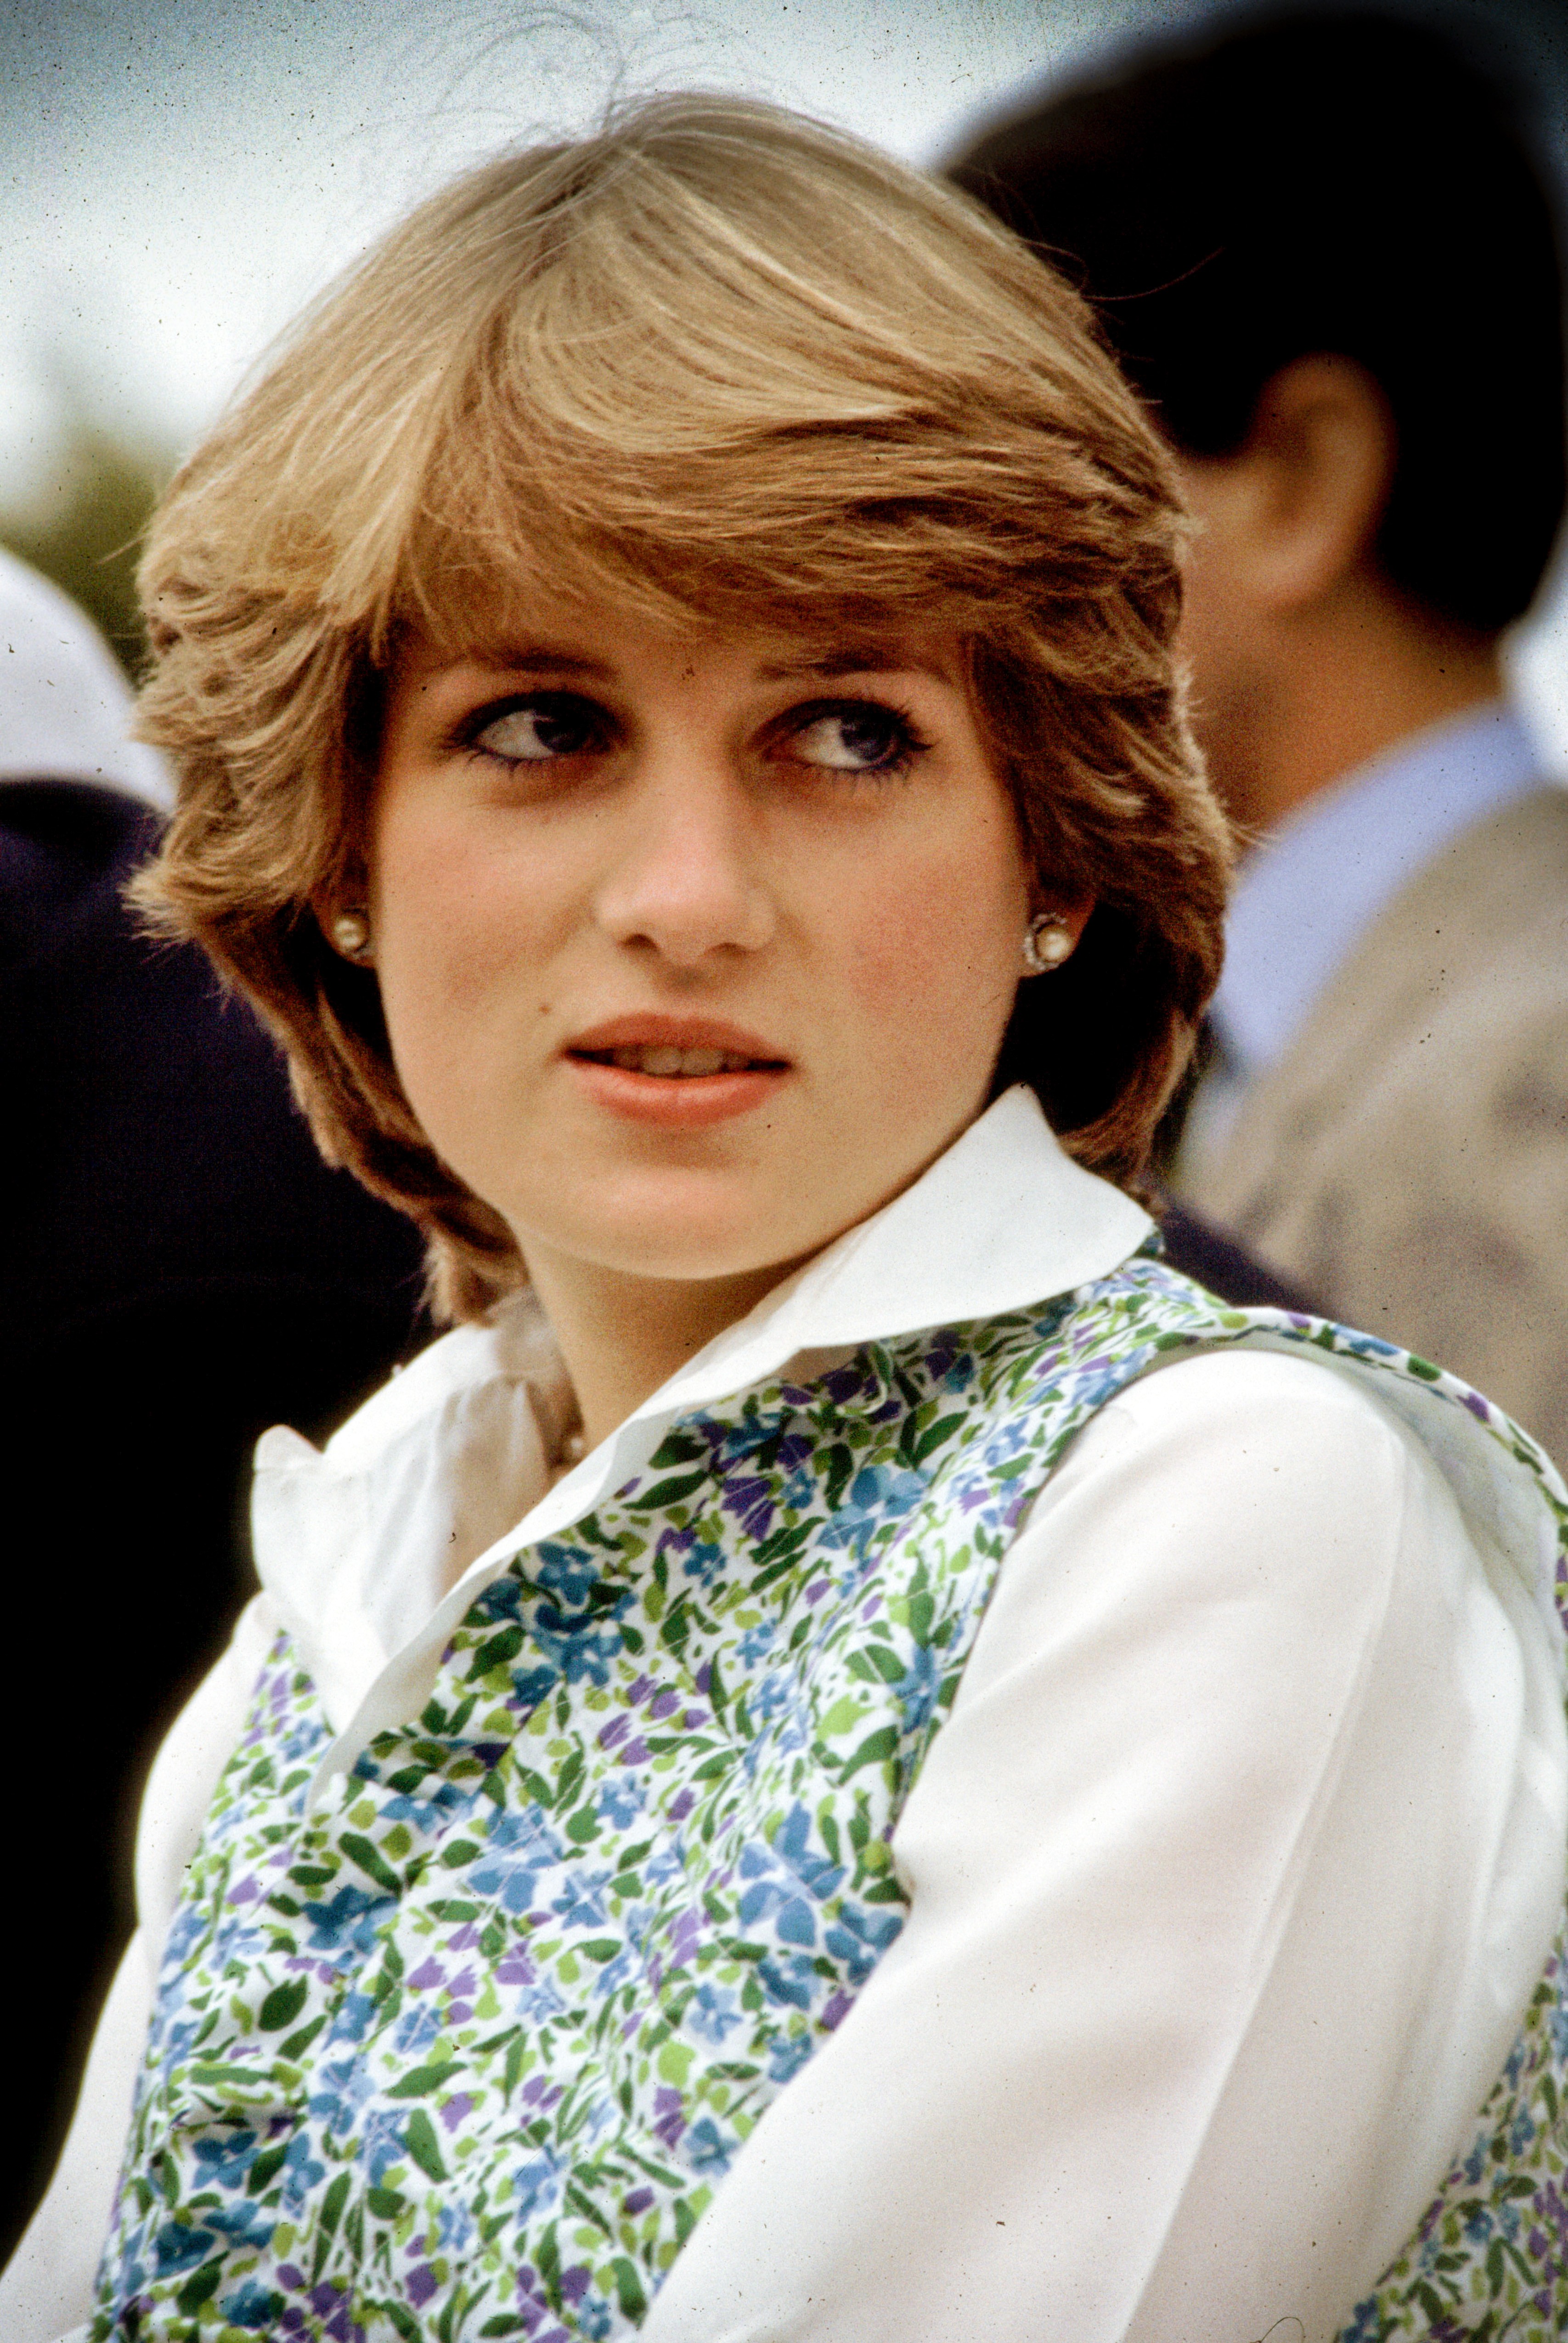 Lady Diana Spencer, the future Diana, Princess of Wales (1961 - 1997) at a polo match in Hampshire, 1981. It was on this occasion that she was driven to tears by press intrusion. (Photo by Kypros/Getty Images) (Foto: Getty Images)